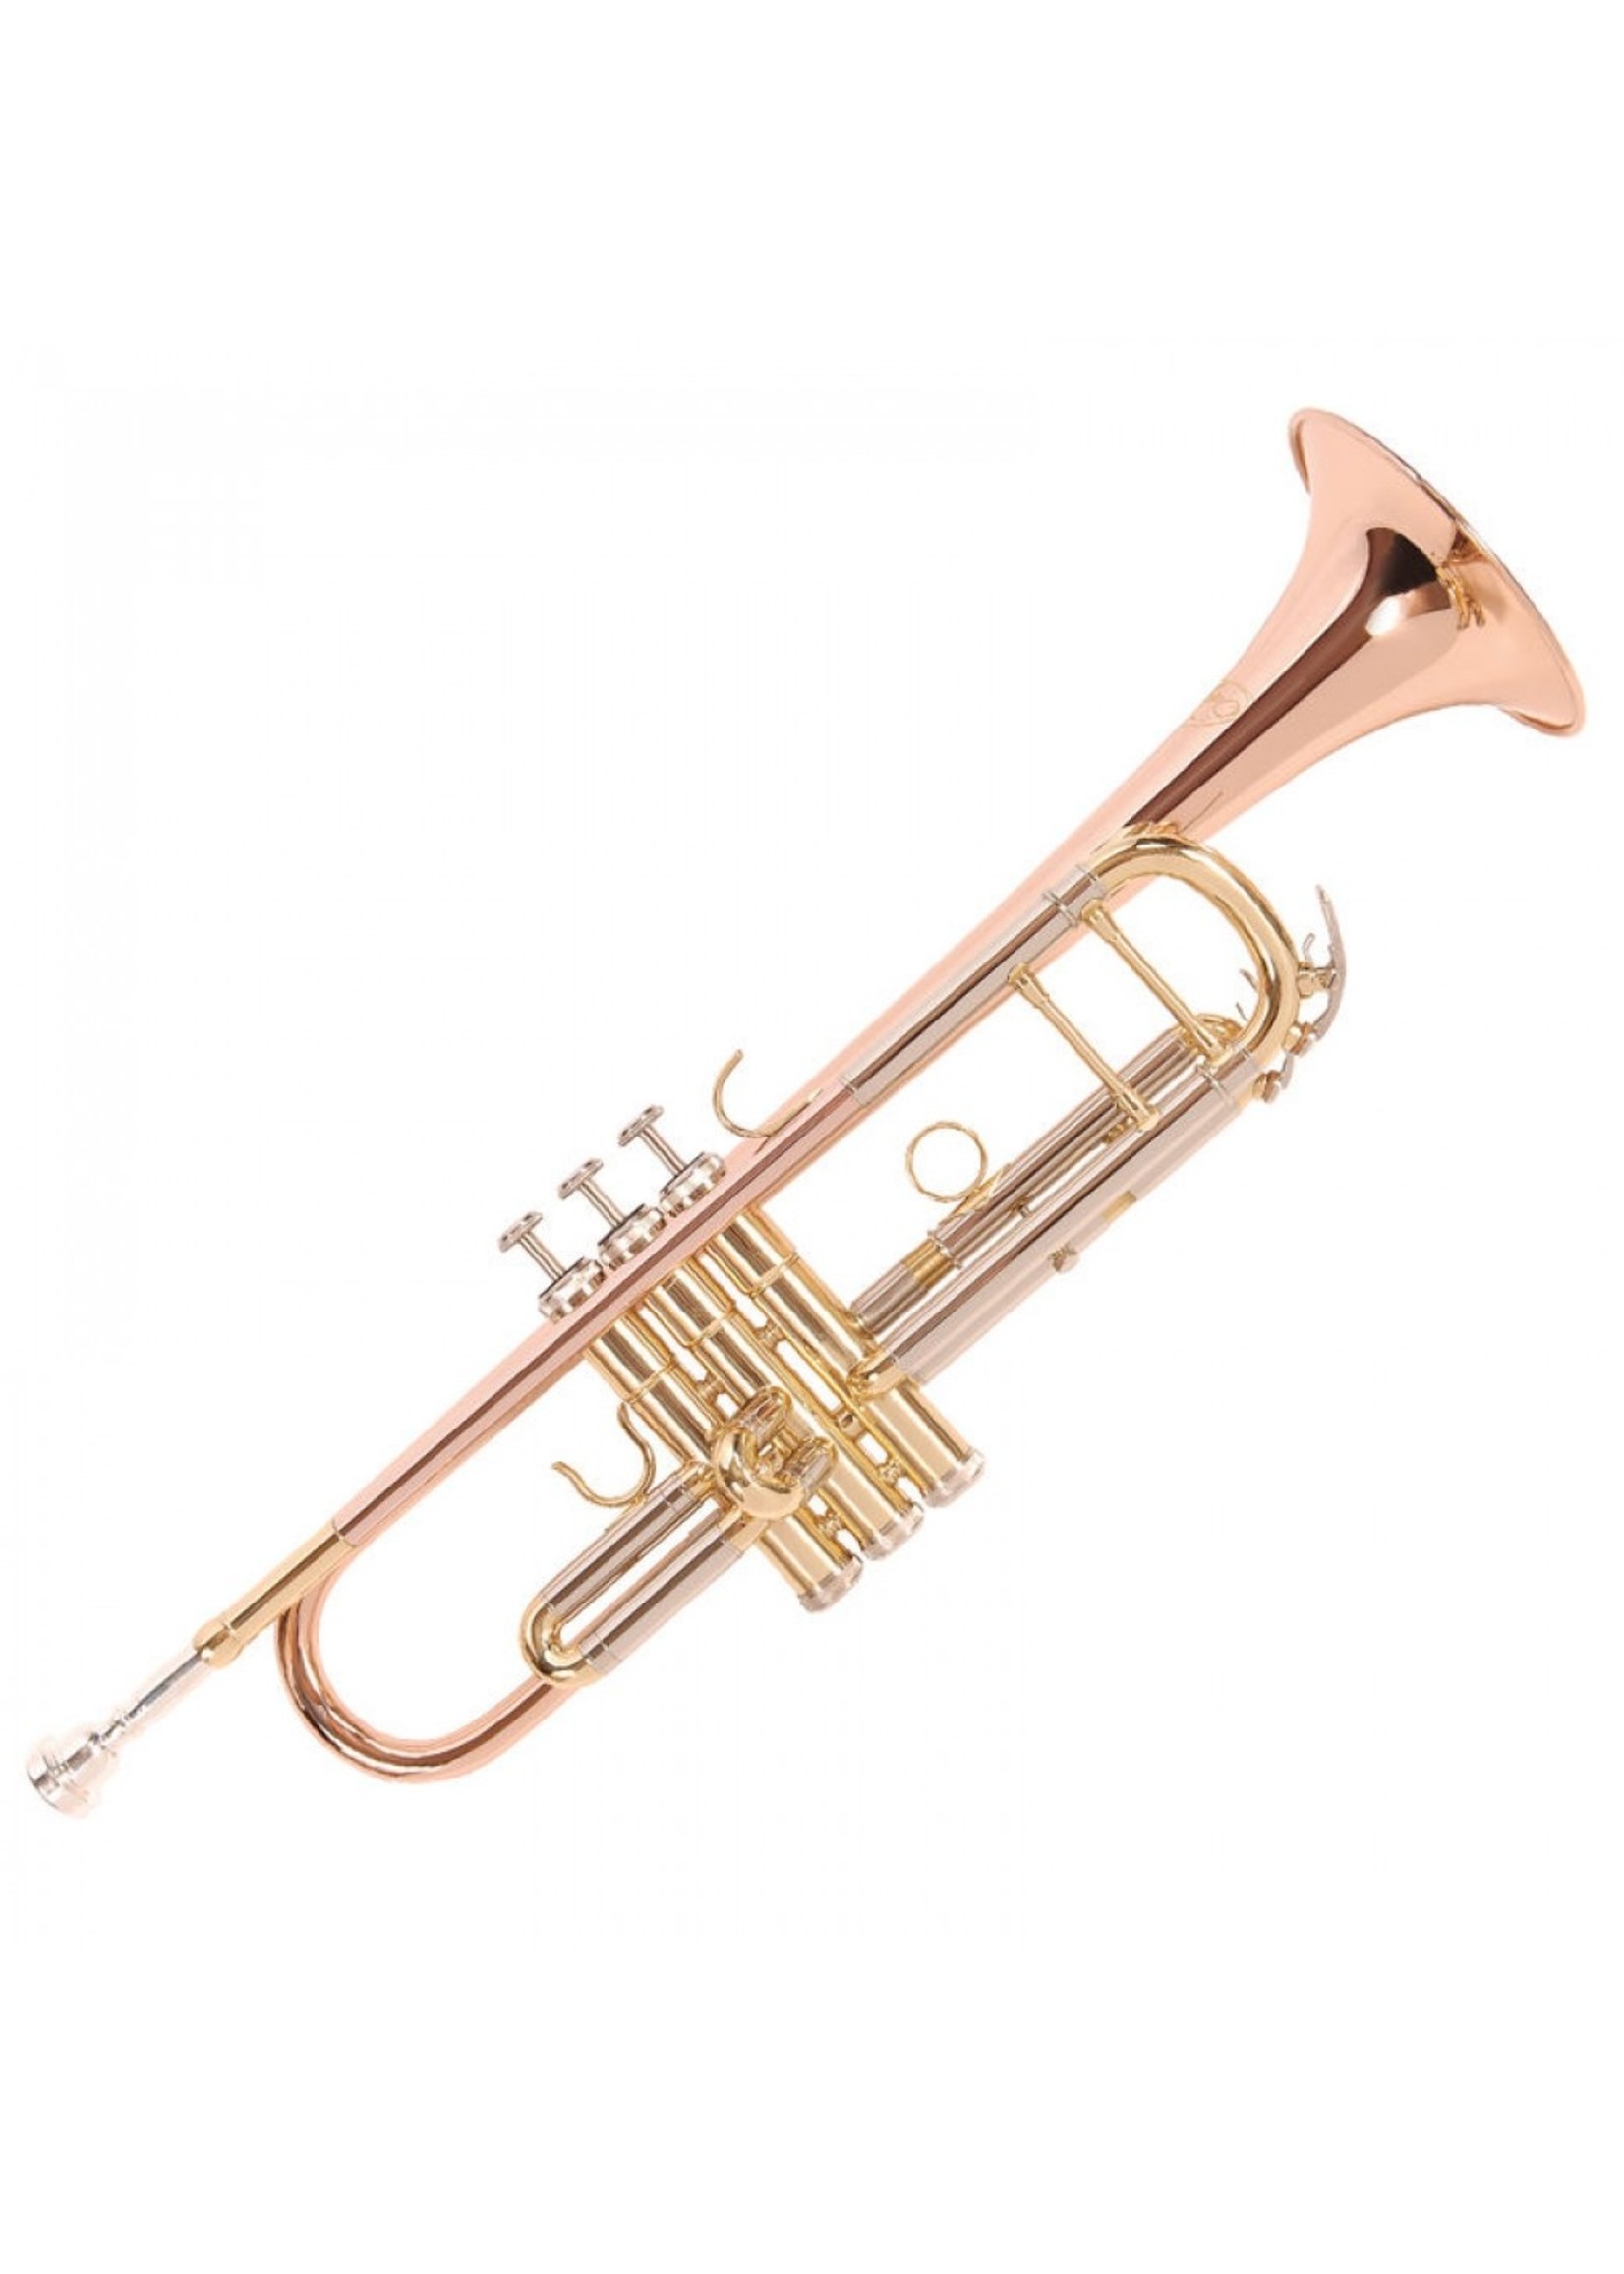 Odyssey Premier Trumpet Outfit